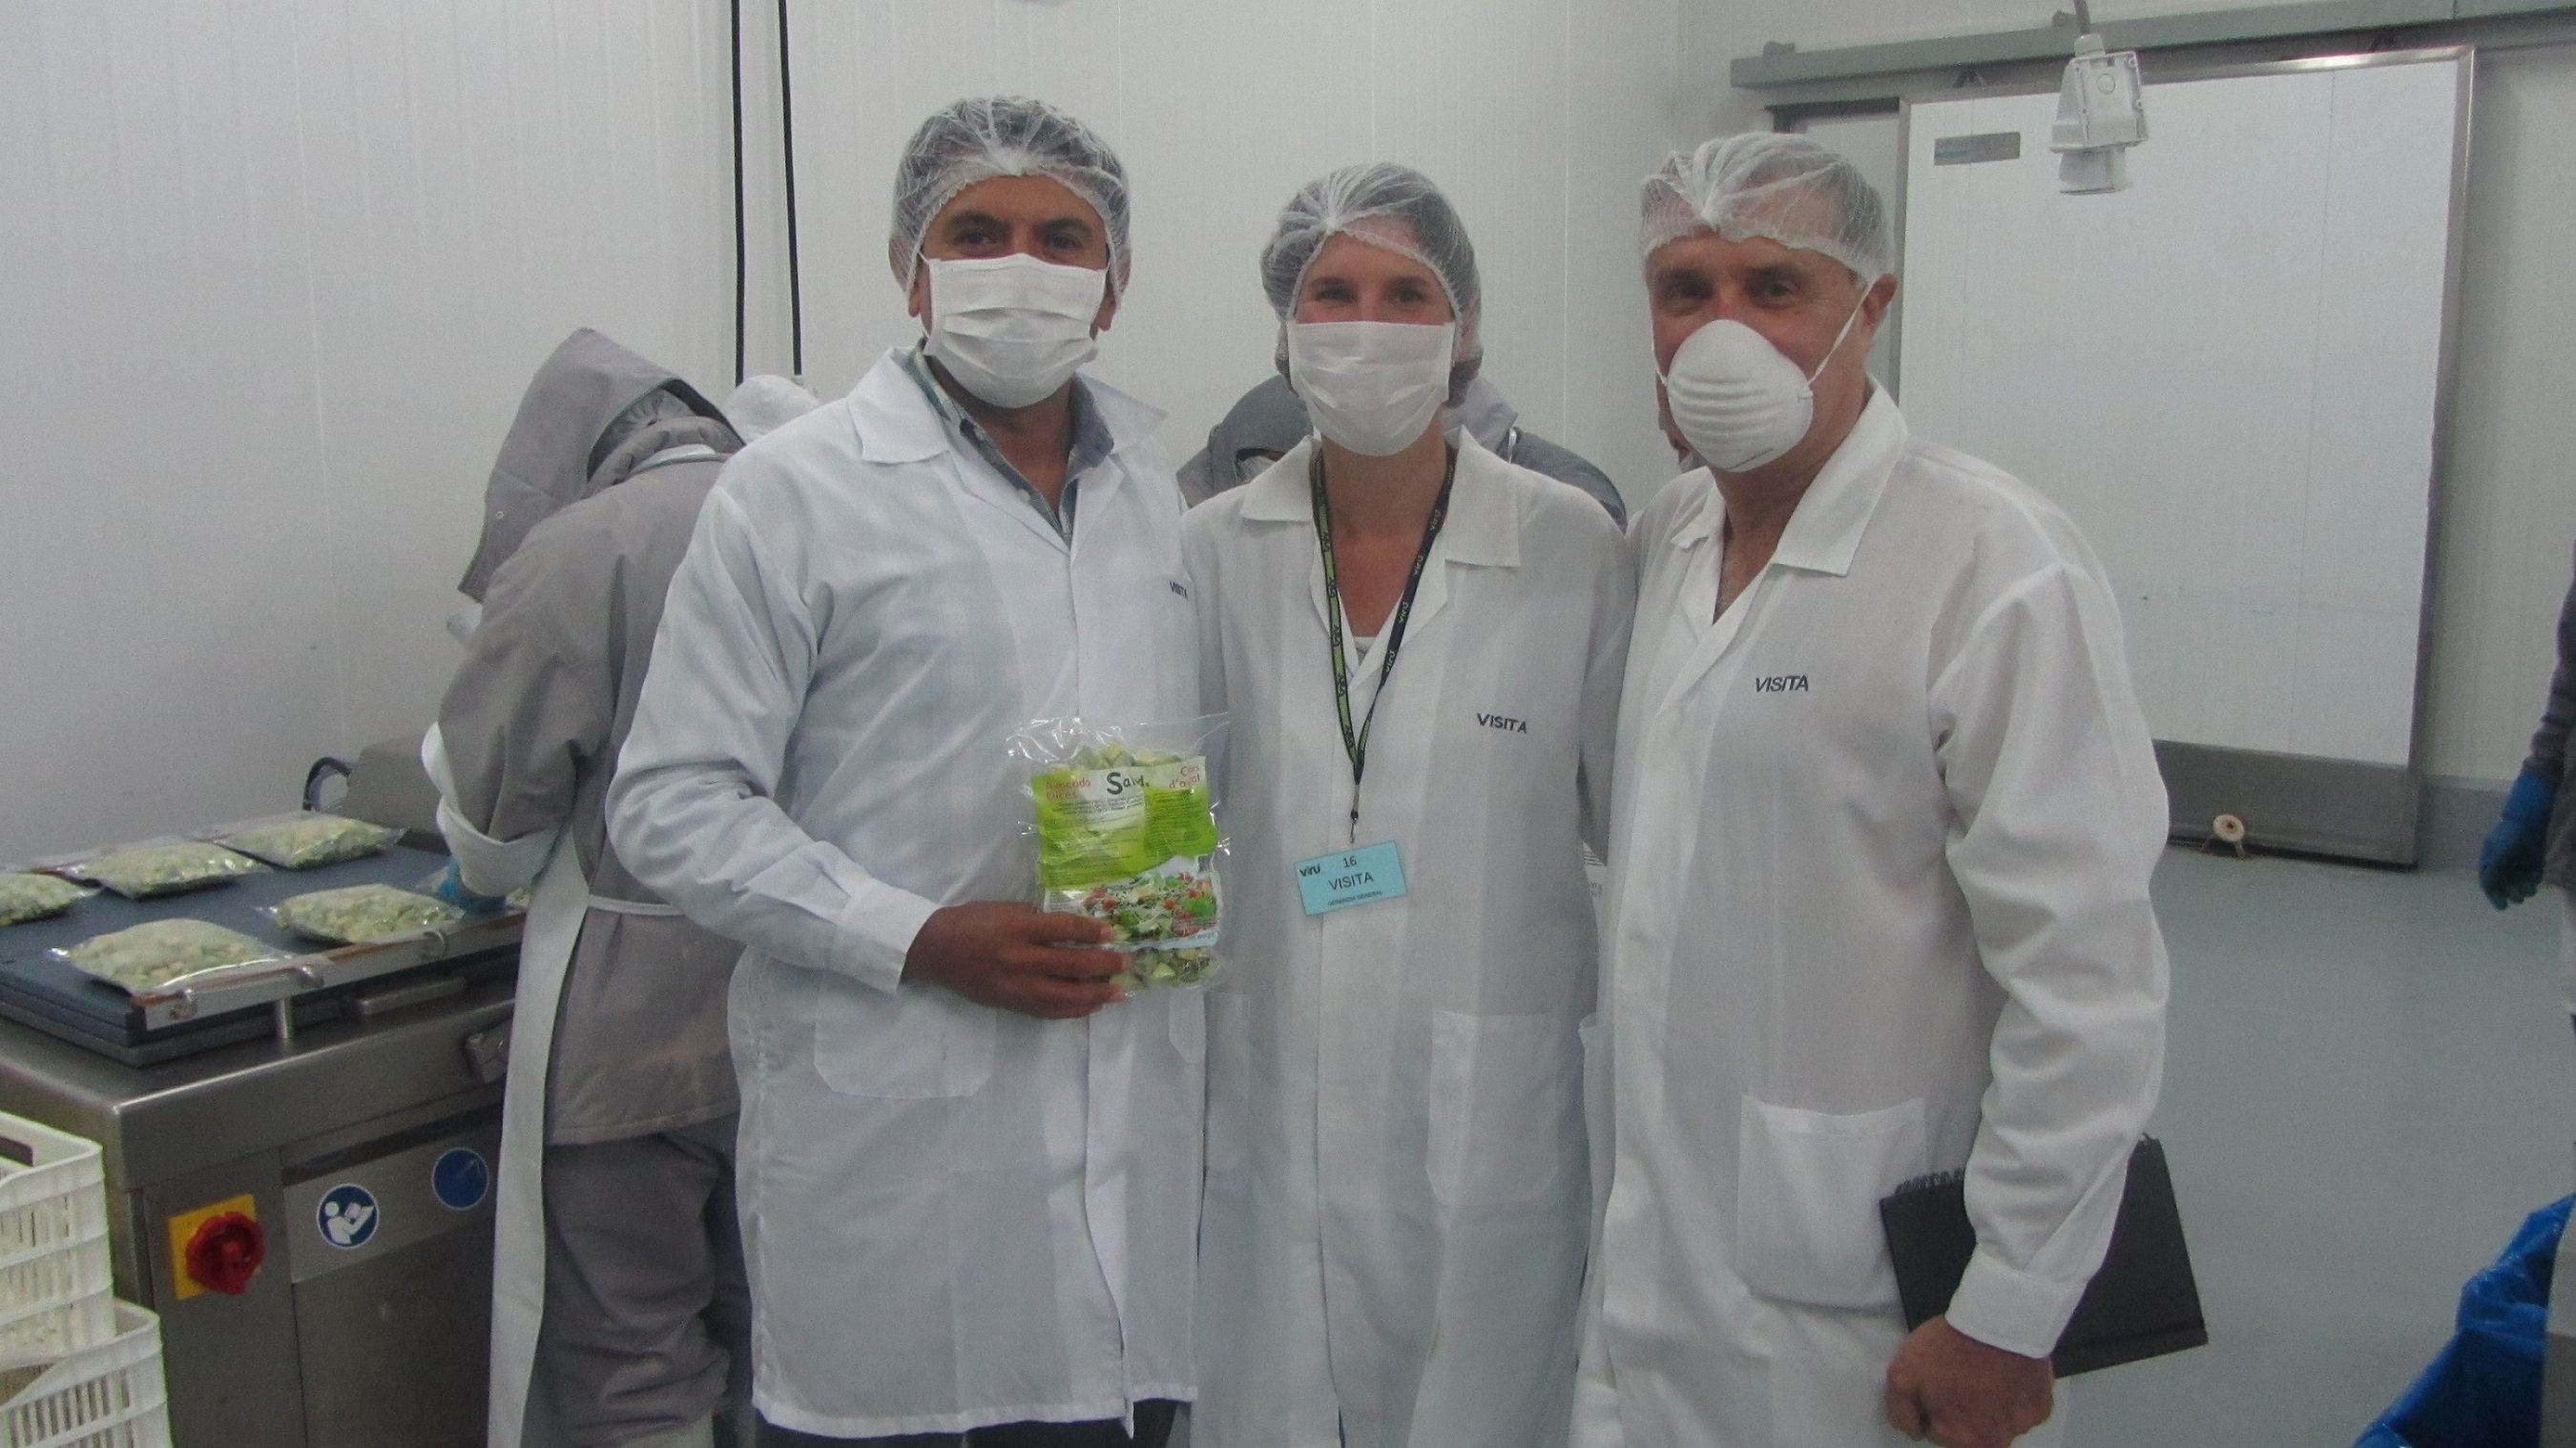 Pedro and Annette in production facility